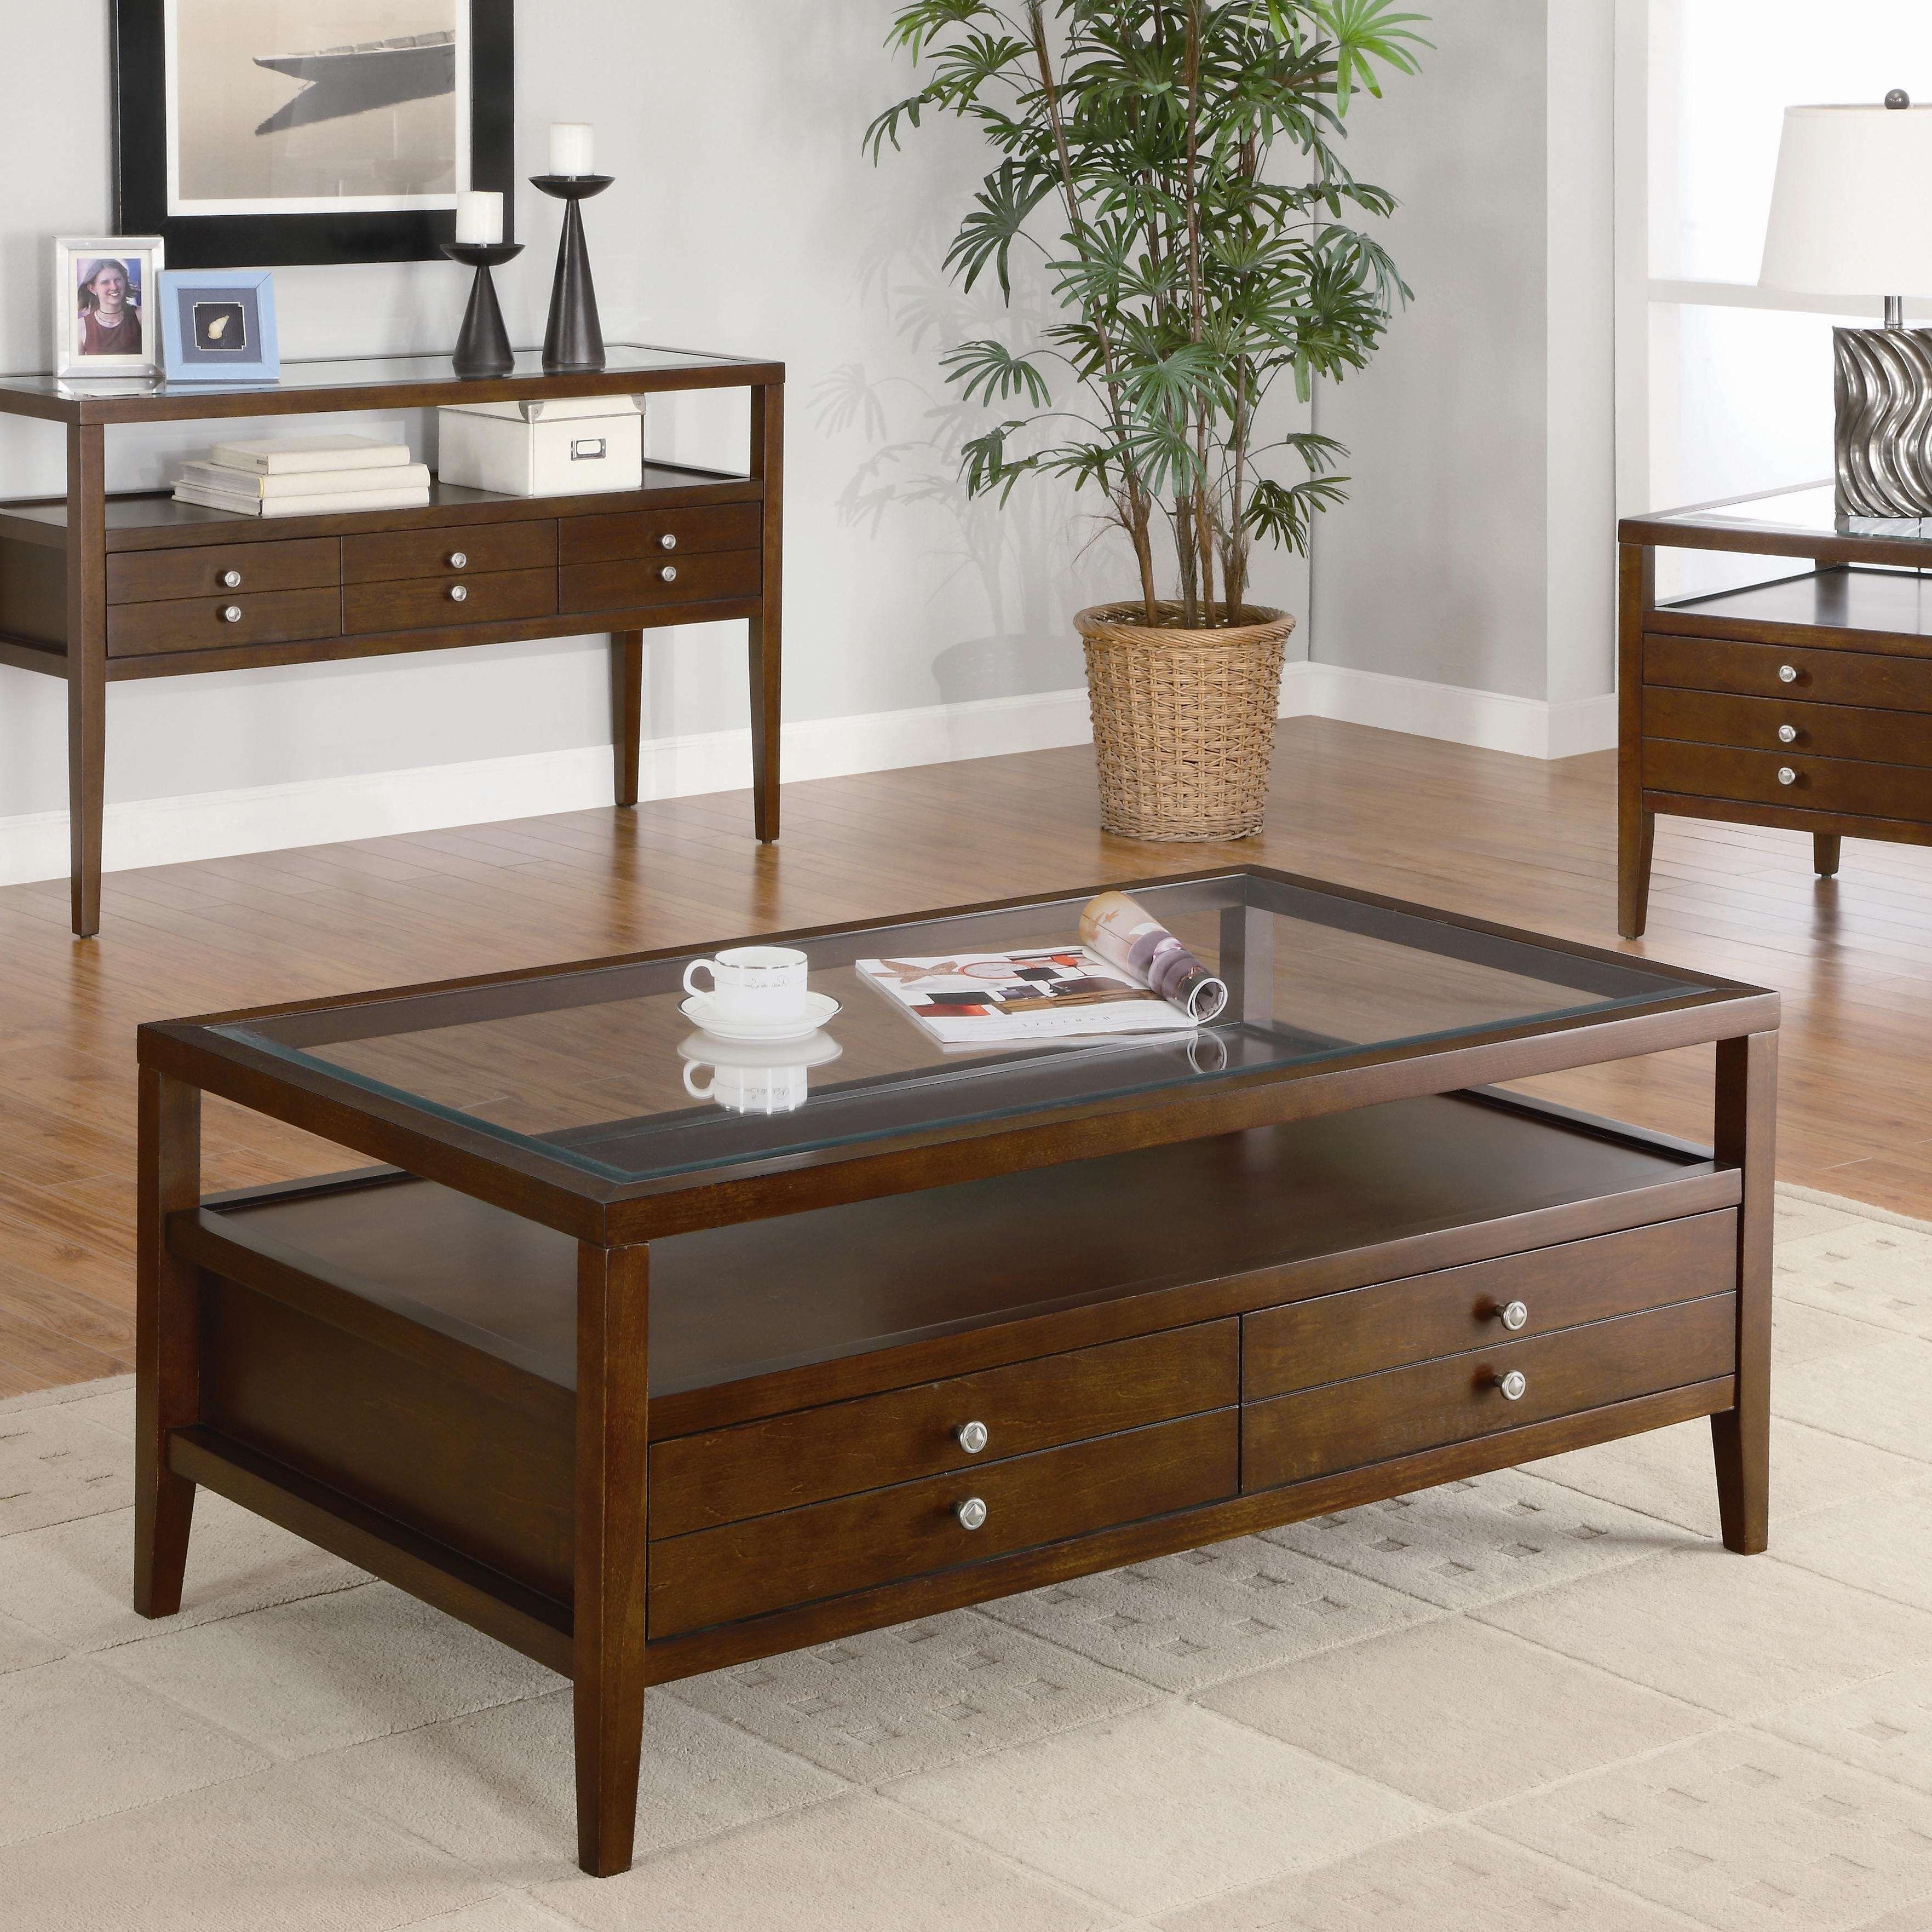 Current Dark Brown Coffee Tables In Living Room : Living Room Furniture Modern Coffee Tables And (View 18 of 20)